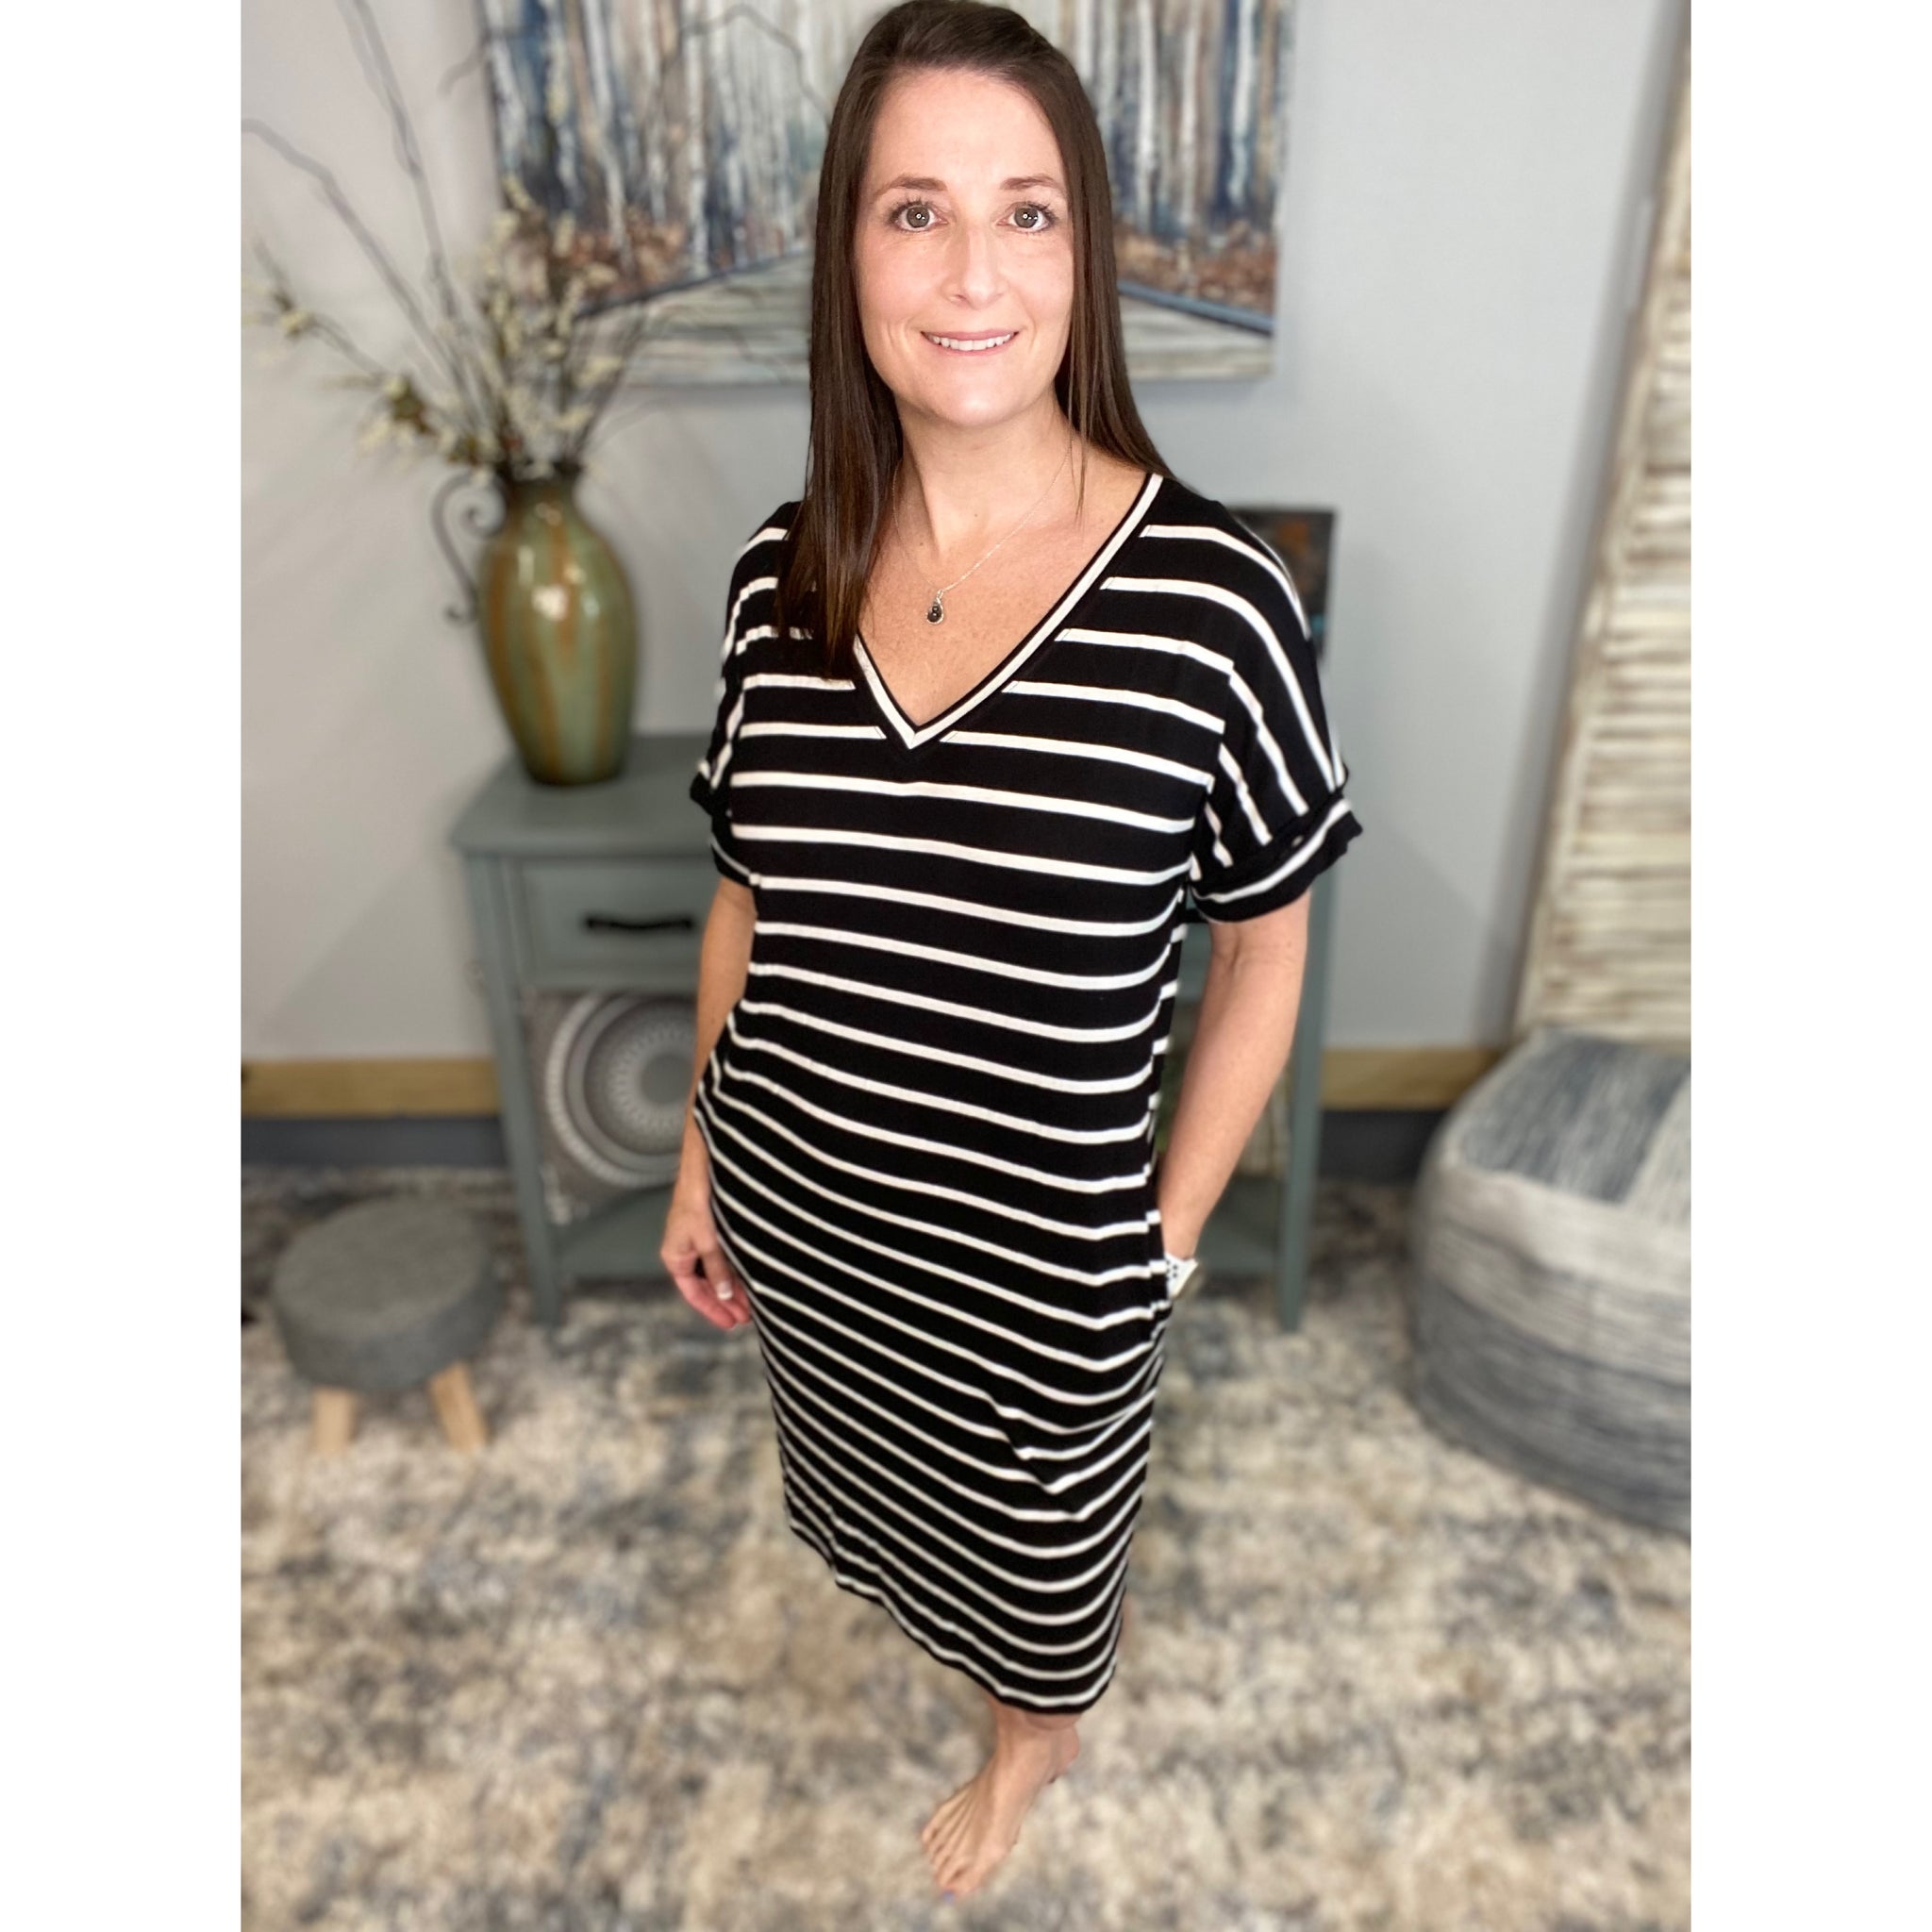 "Think Out The Box" Boxy V-Neck Striped Rolled Cuff Sleeve Pocket Summer Tee Shirt Dress Black S/M/L/XL